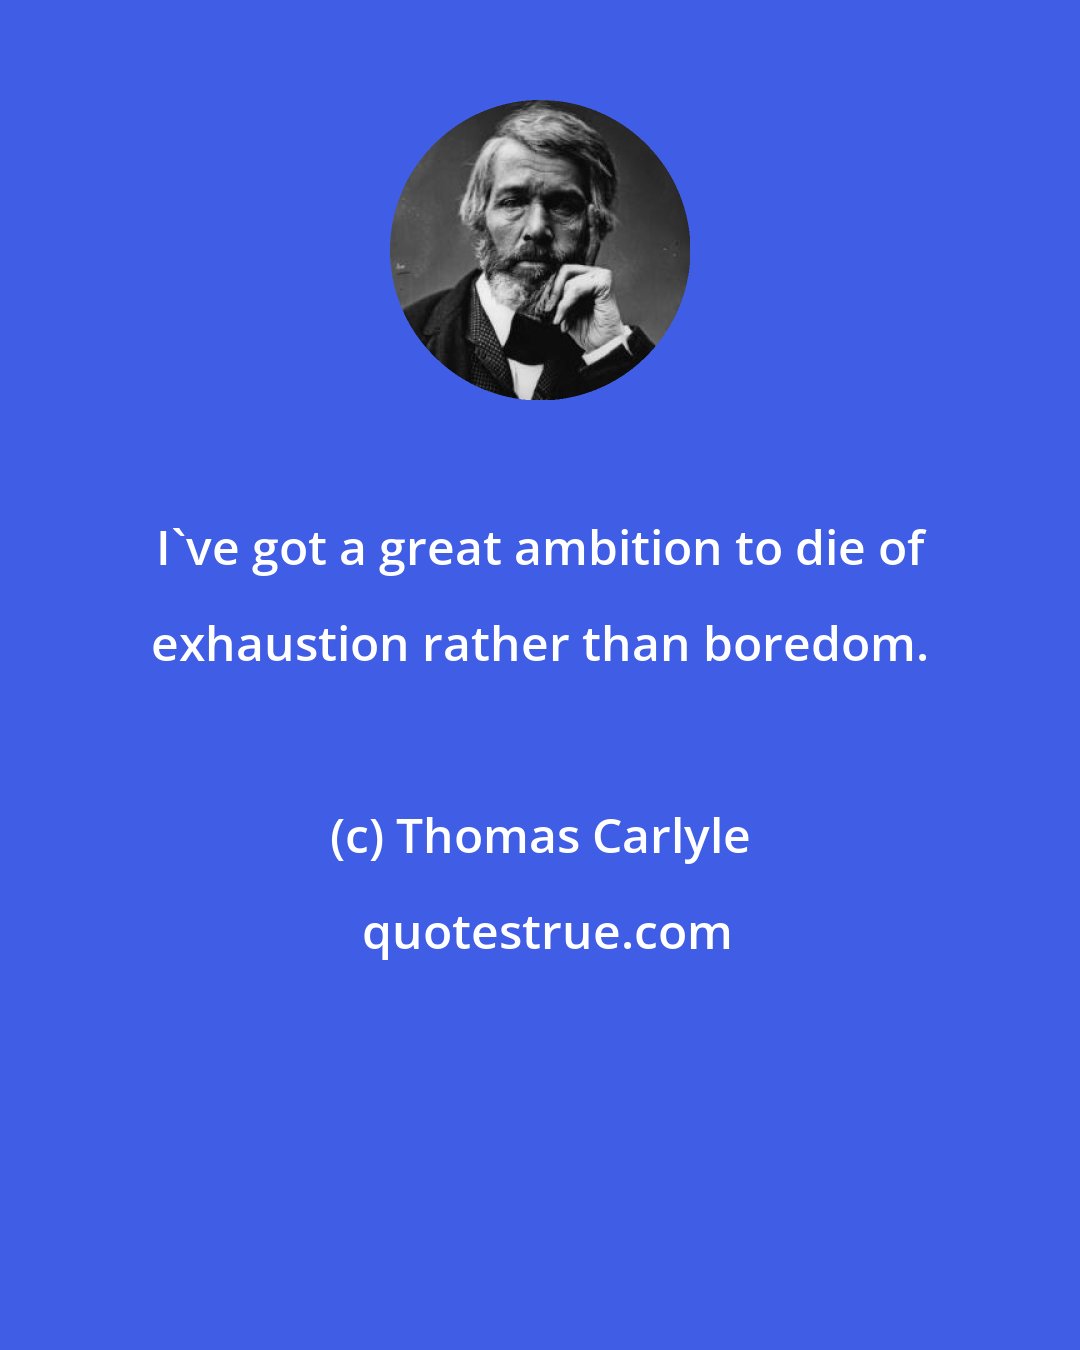 Thomas Carlyle: I've got a great ambition to die of exhaustion rather than boredom.